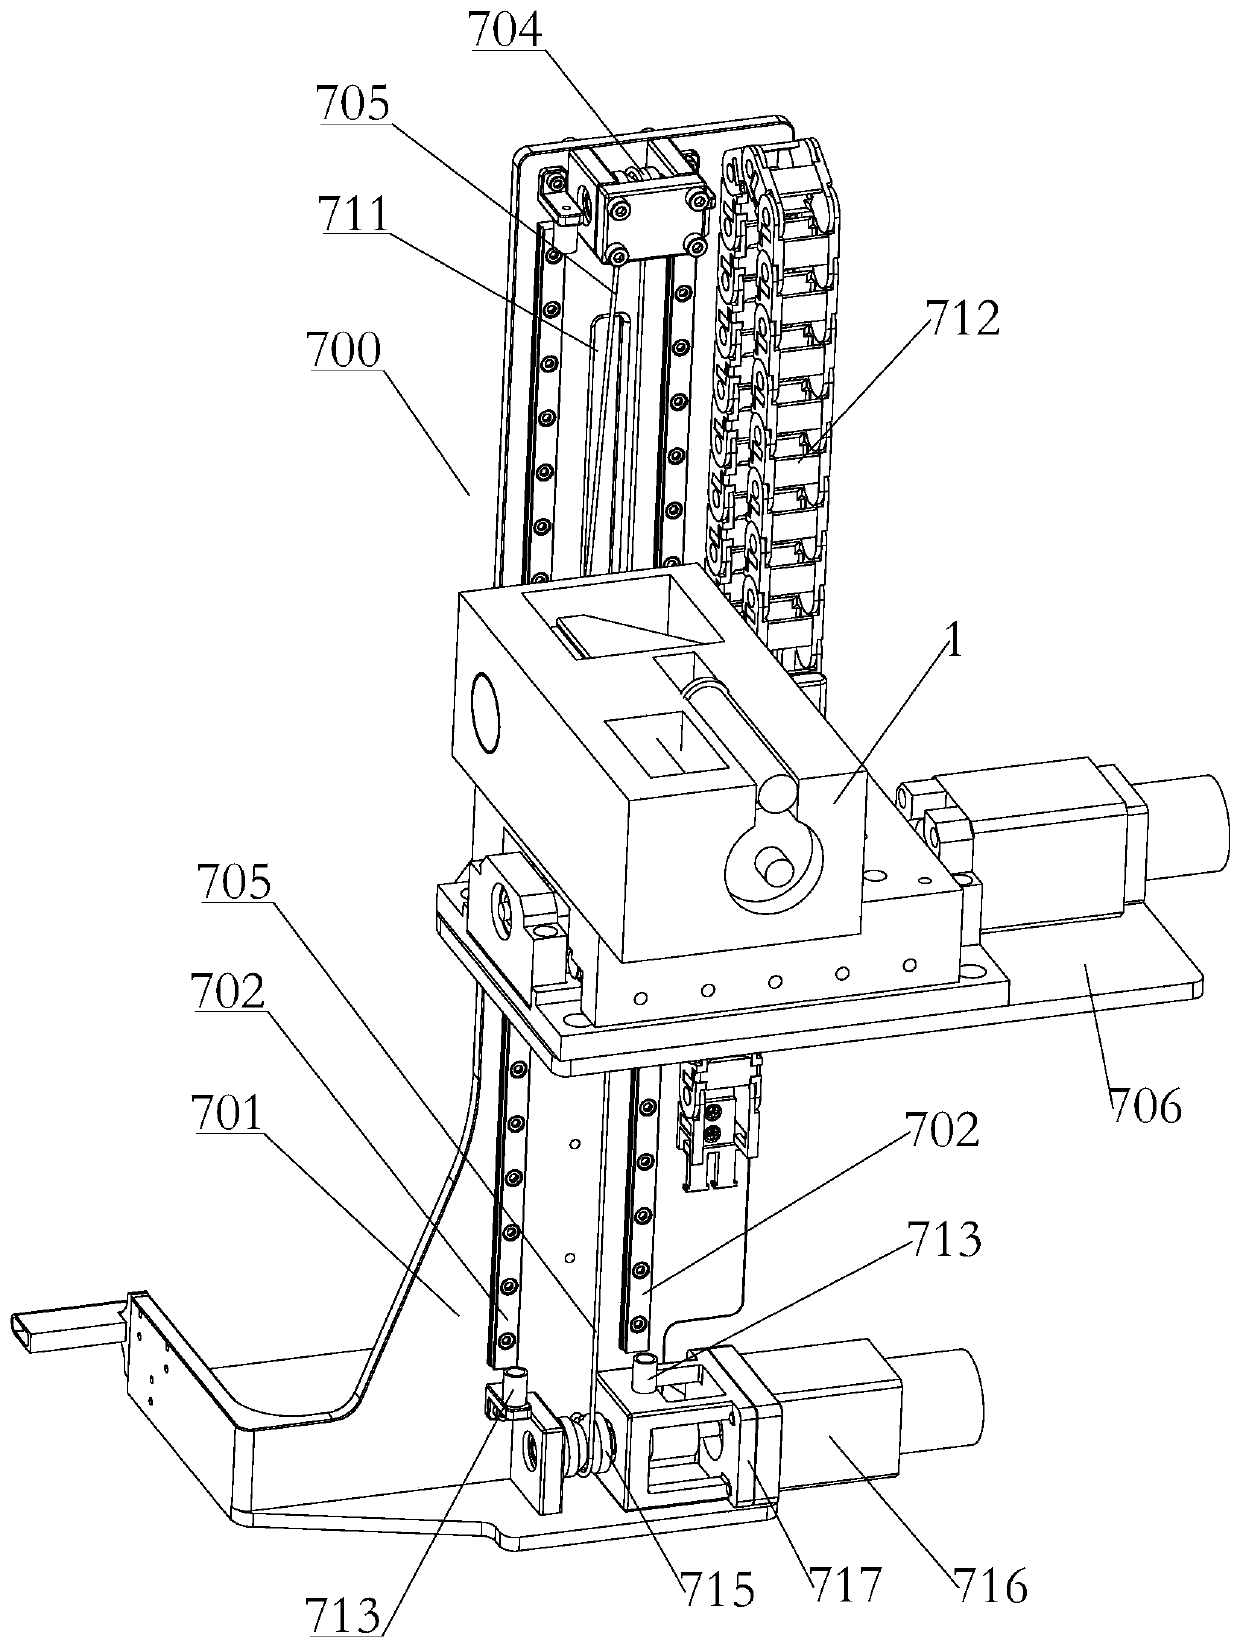 Steel wire rope driving mechanism for optical inspection outside material cabin and exposure platform